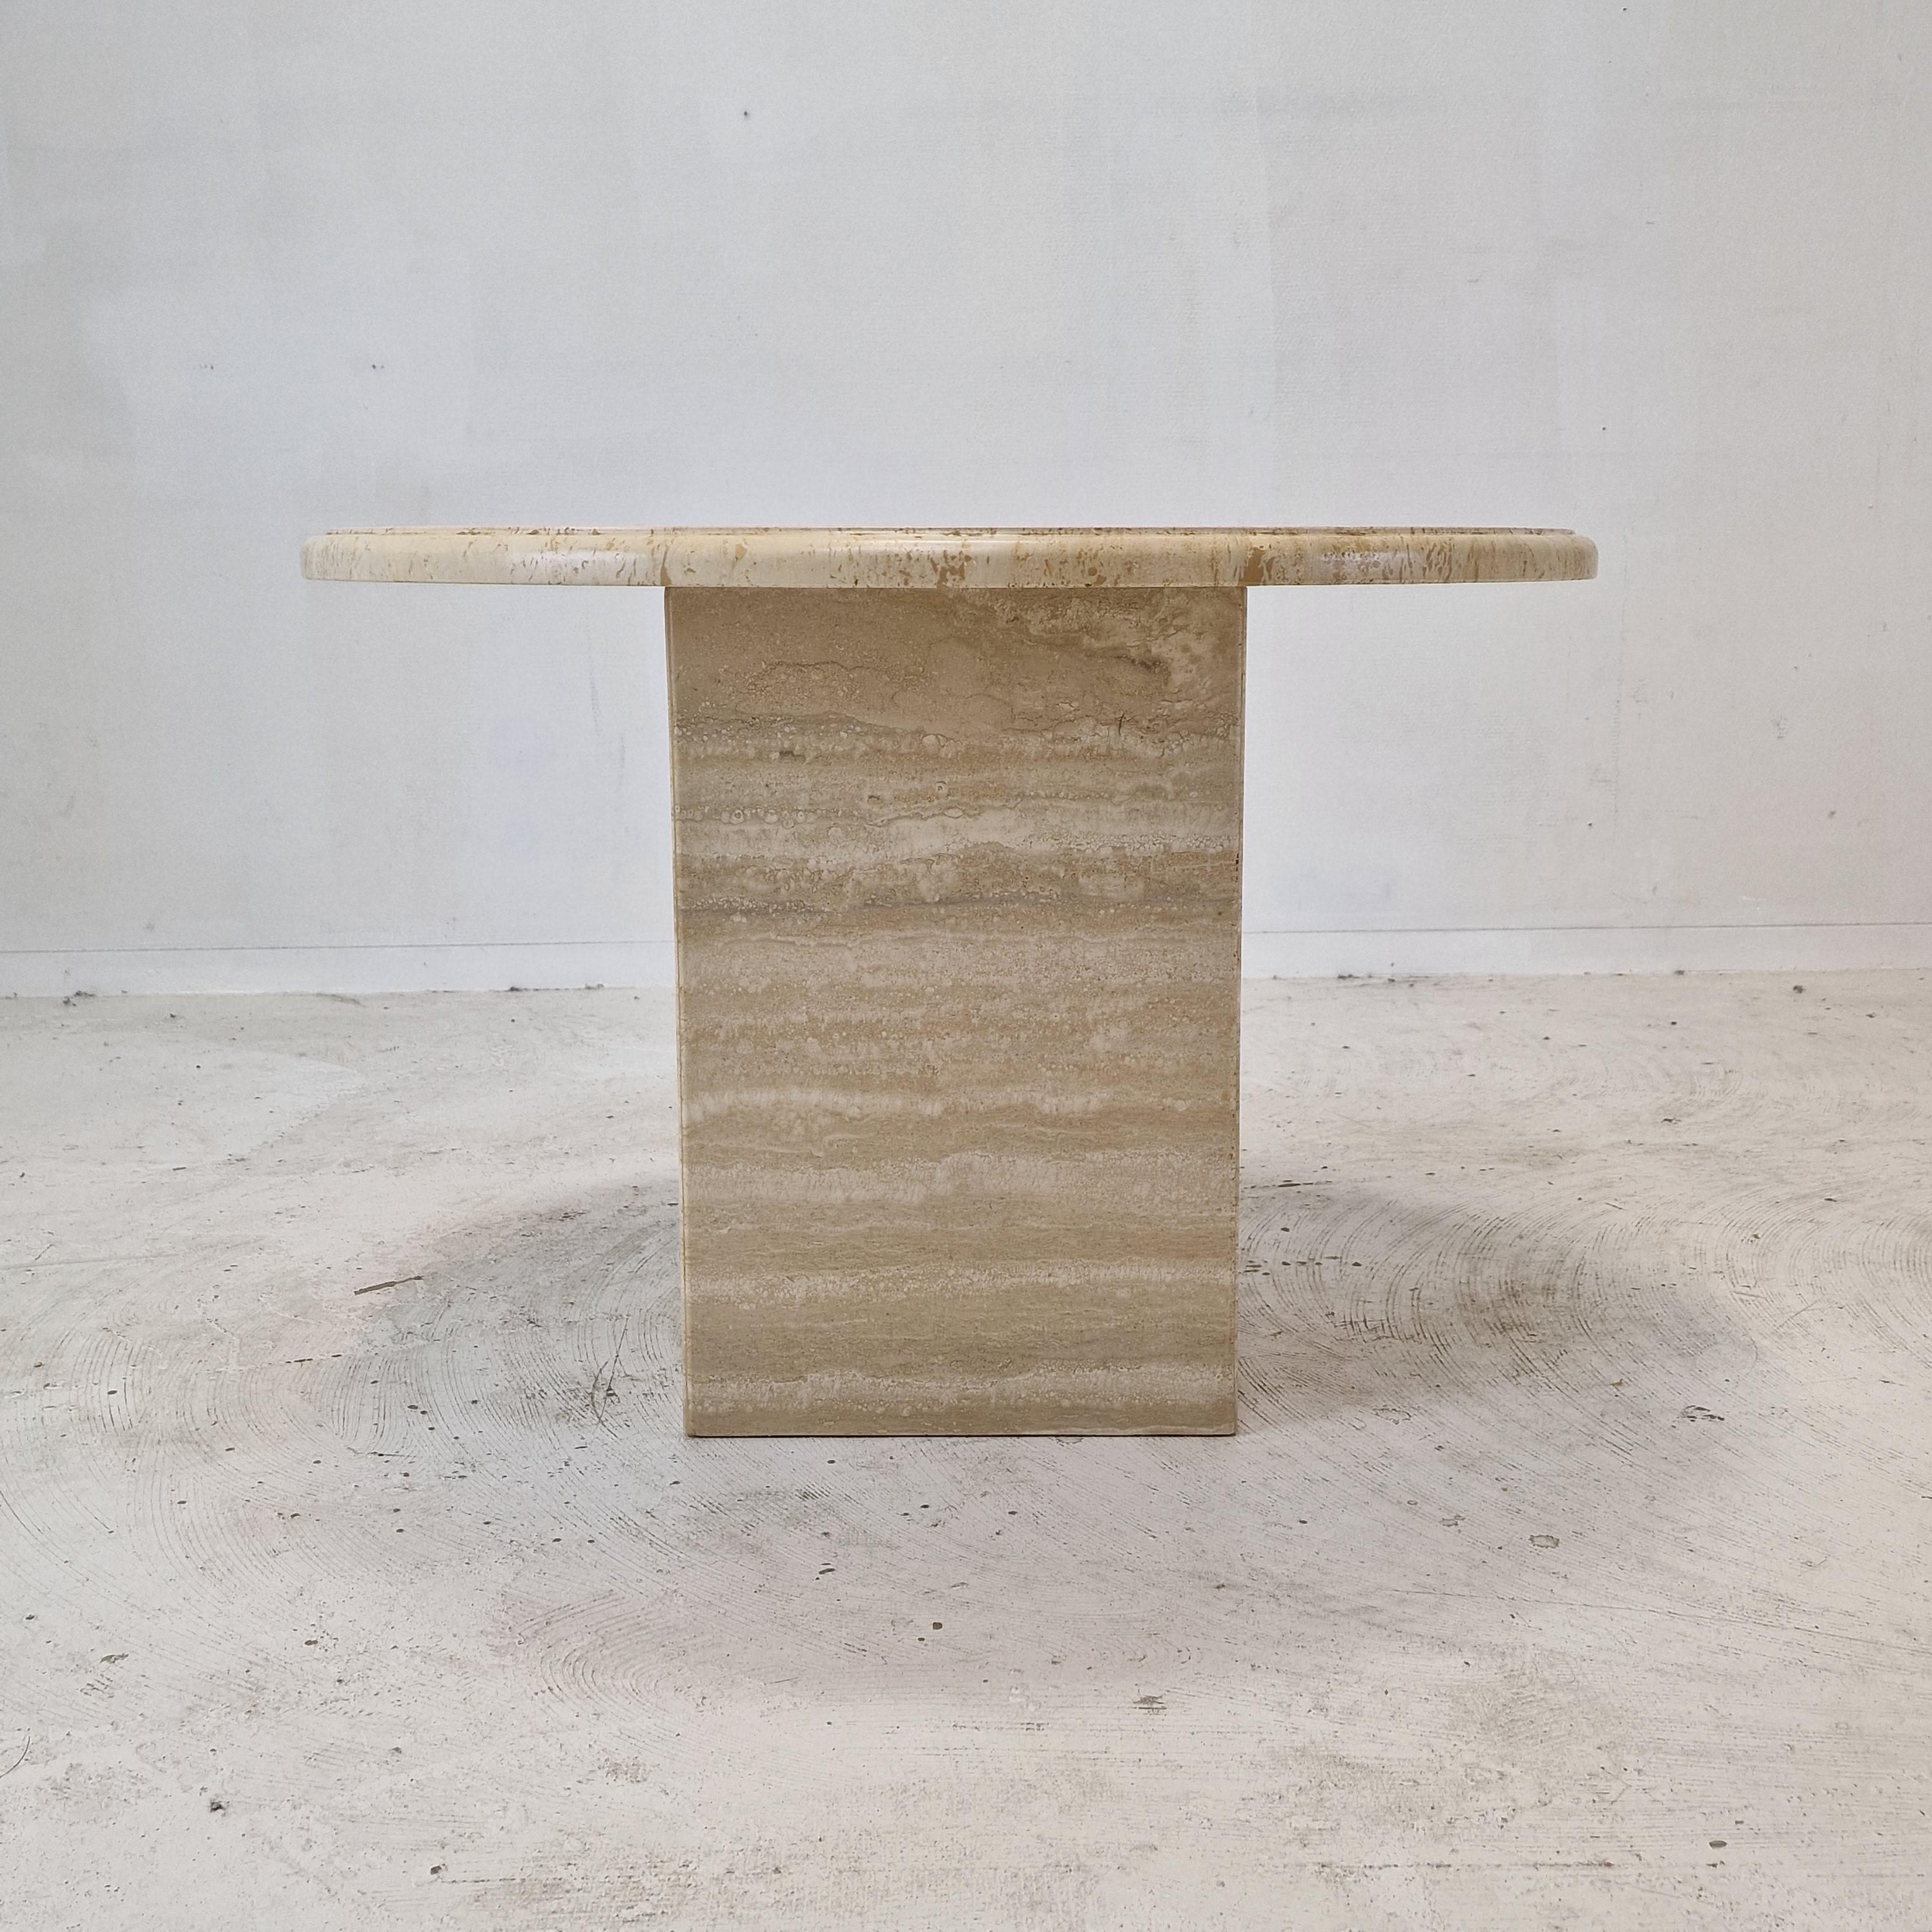 Late 20th Century Italian Round Coffee or Side Table in Travertine, 1980s For Sale